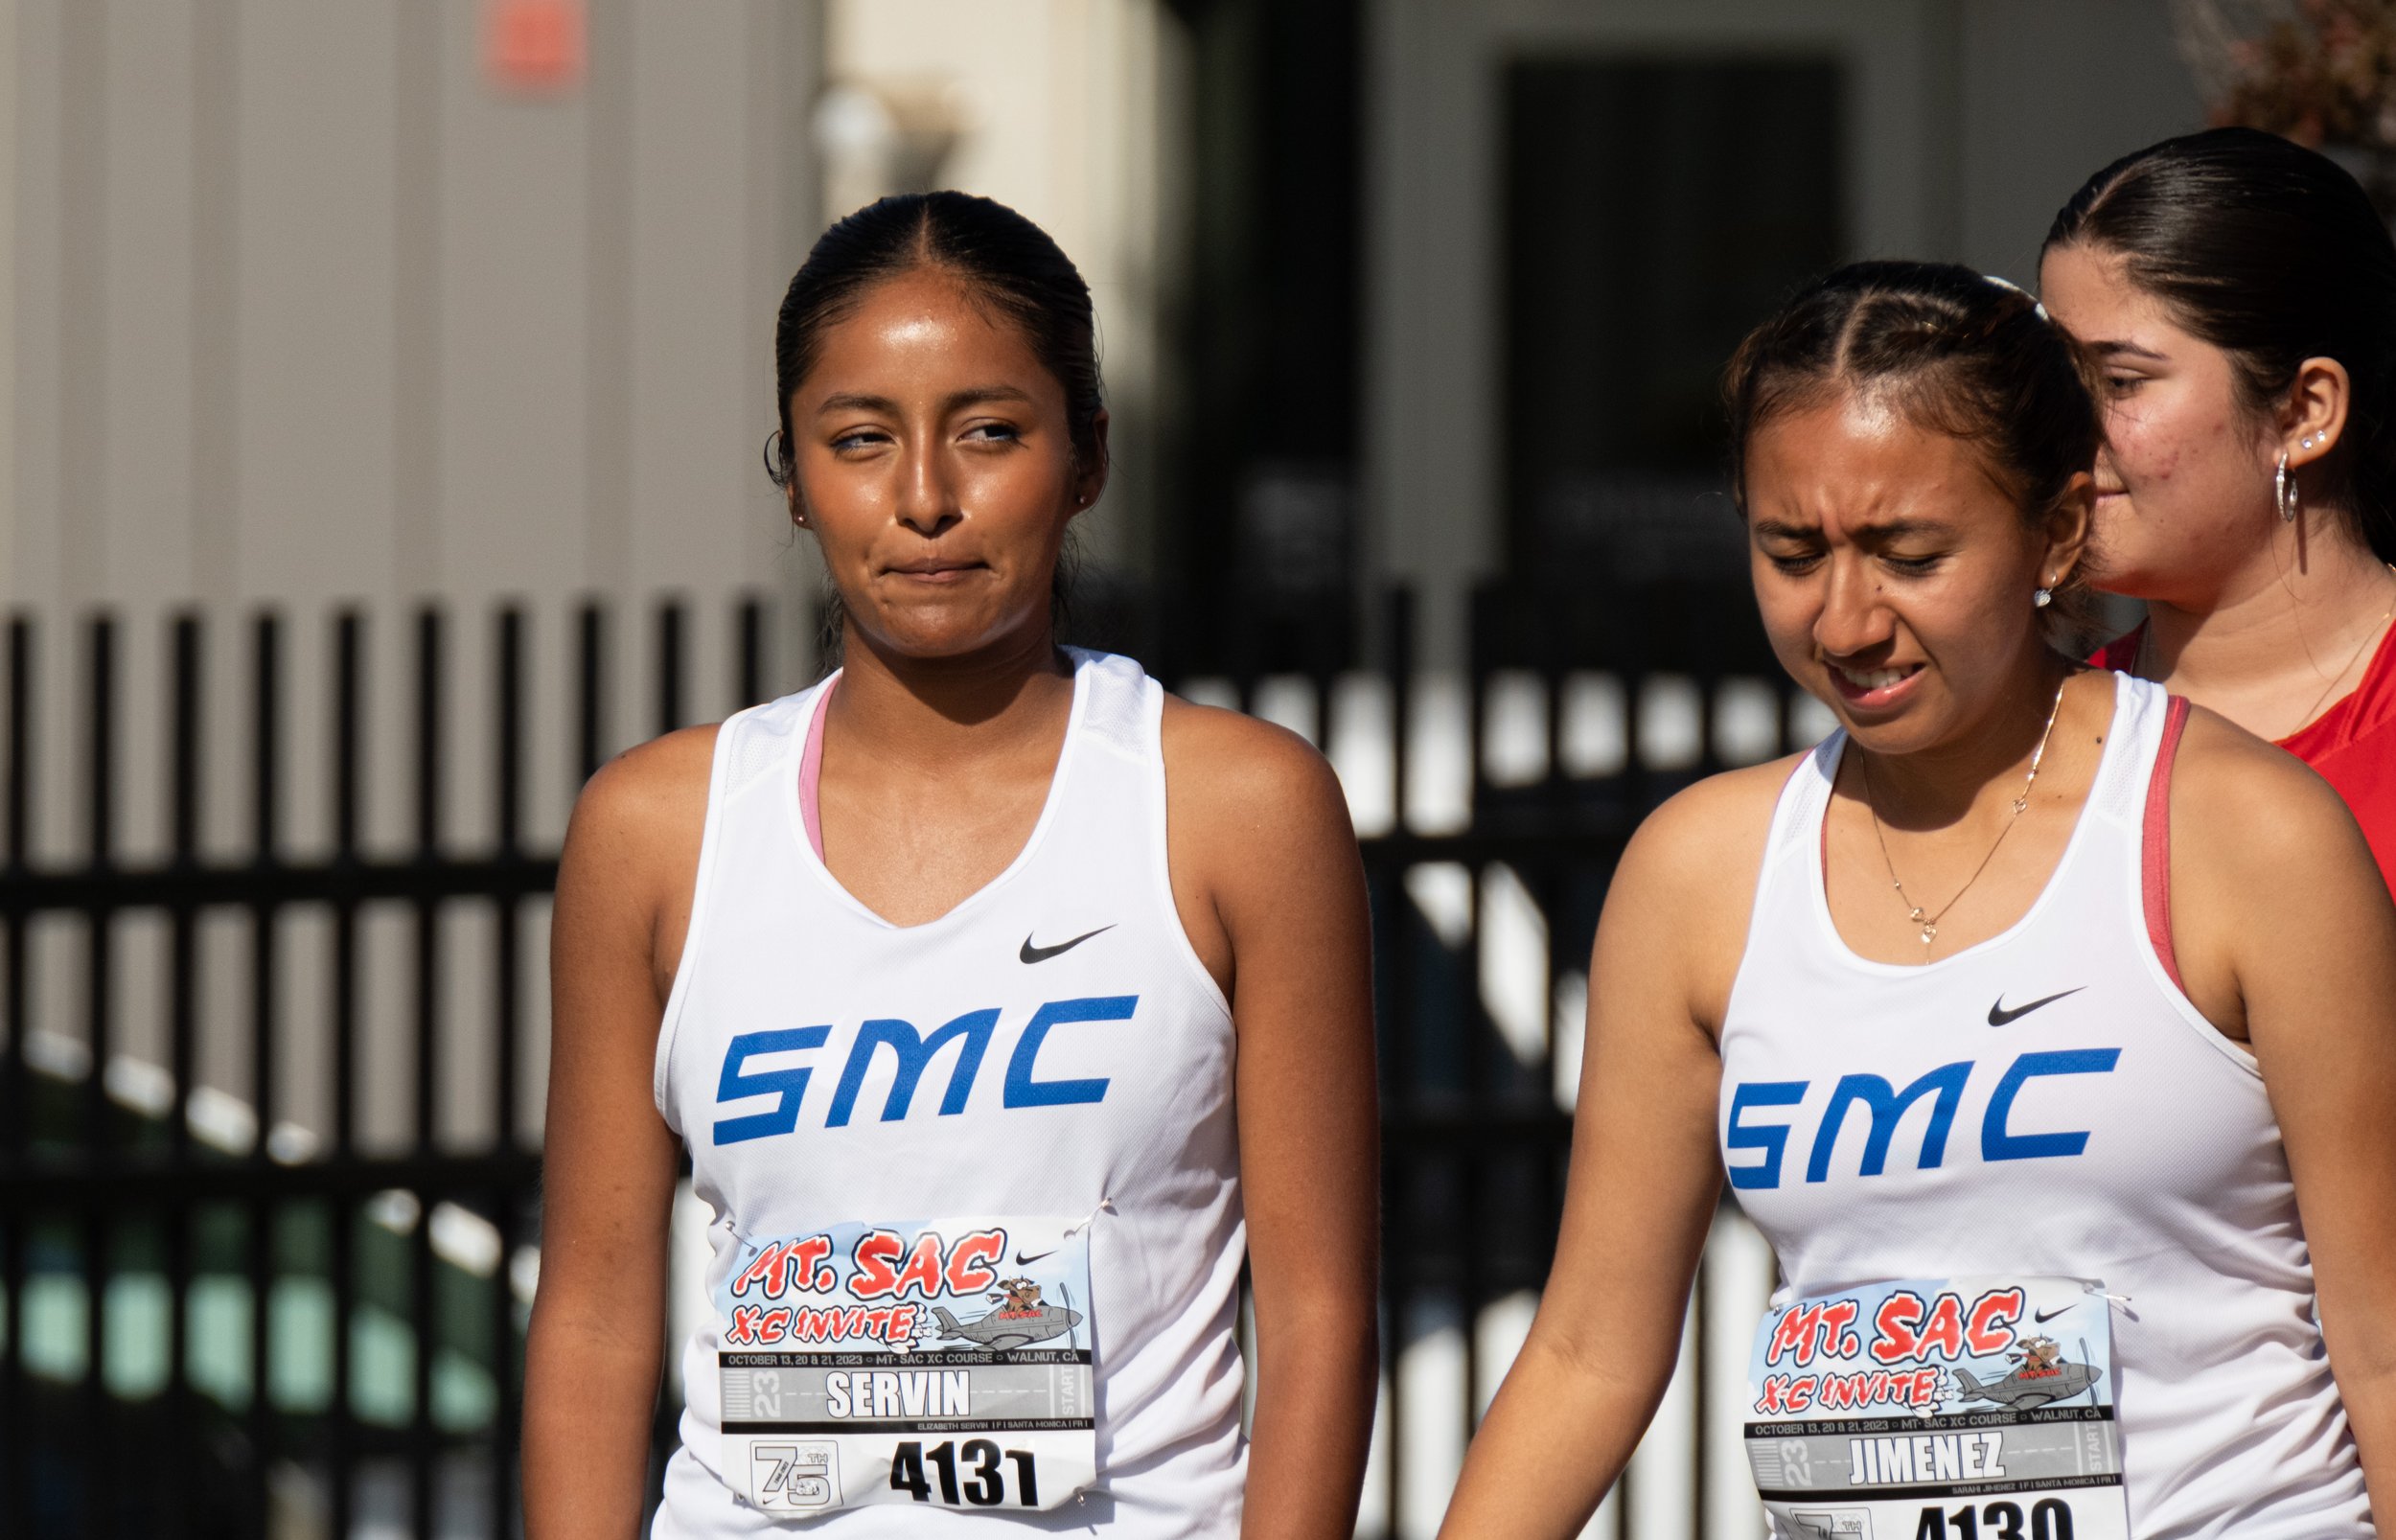  Lisa Servin(L) and Sarahi Jimenez(R) before the start of their race during the MT. SAC Cross Country Invitational on Friday, Oct 13 at MT. SAC in Walnut, Calif. (Danilo Perez | The Corsair) 